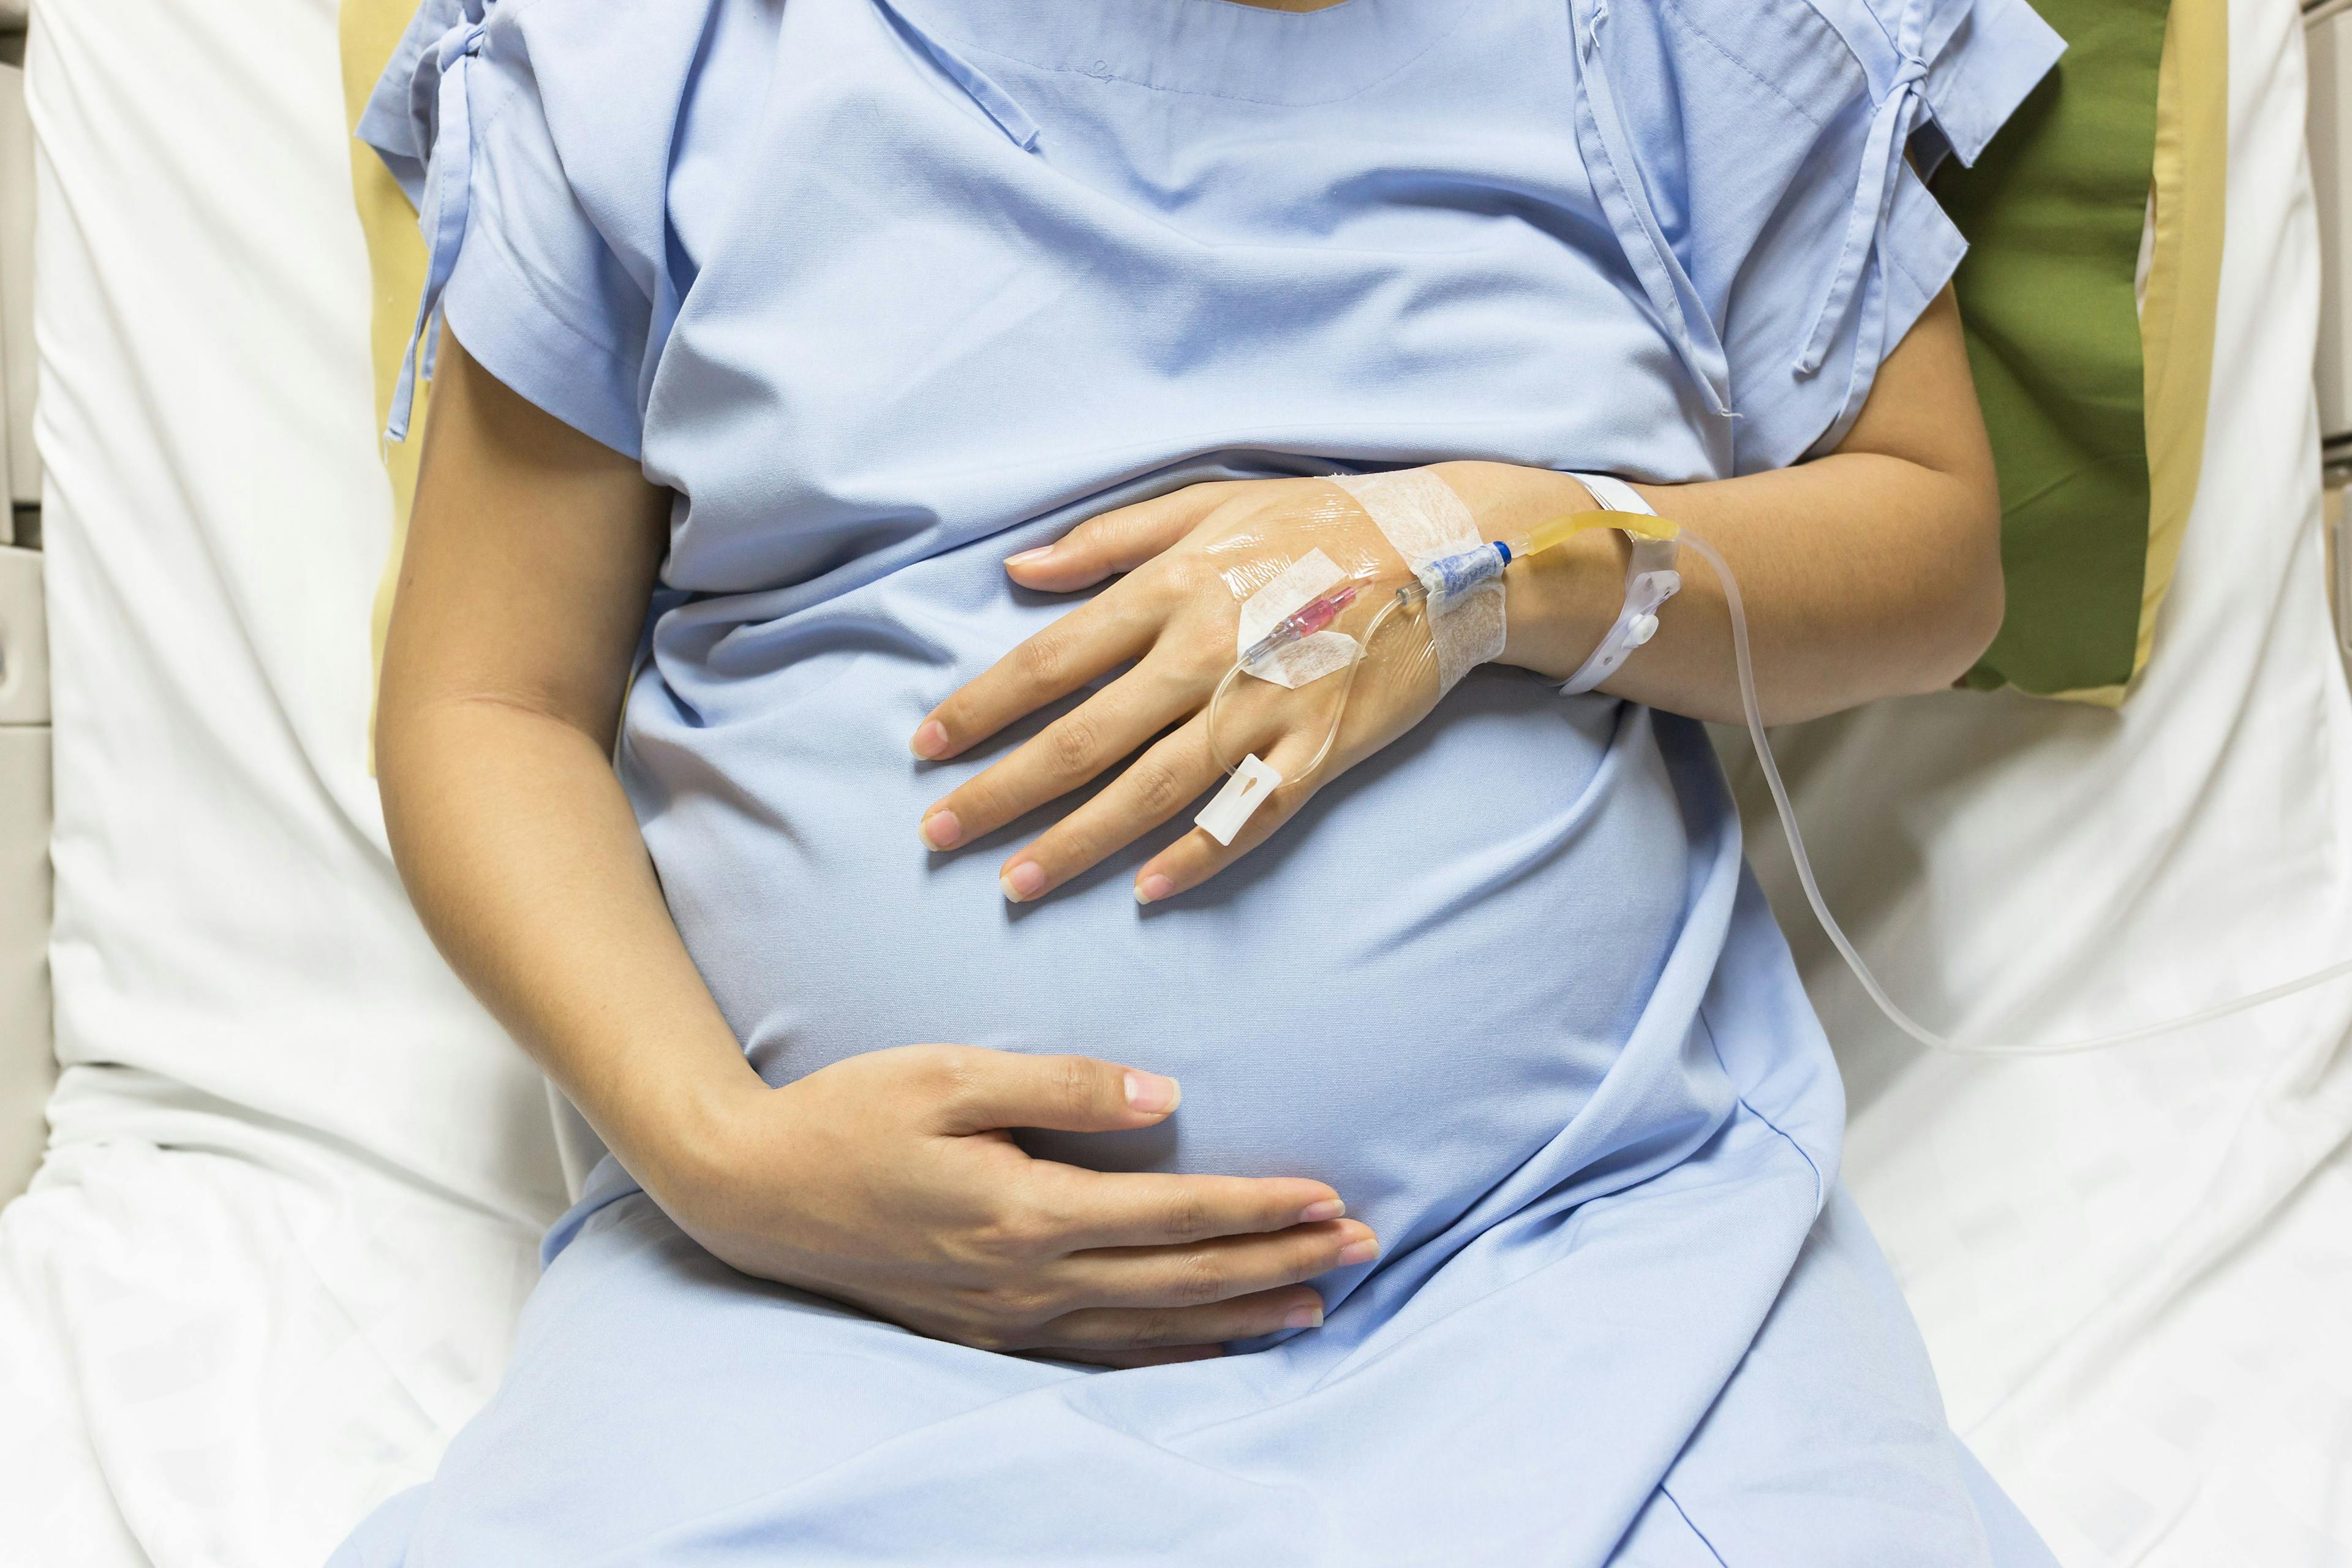 Stock image of a pregnant woman at a hospital.